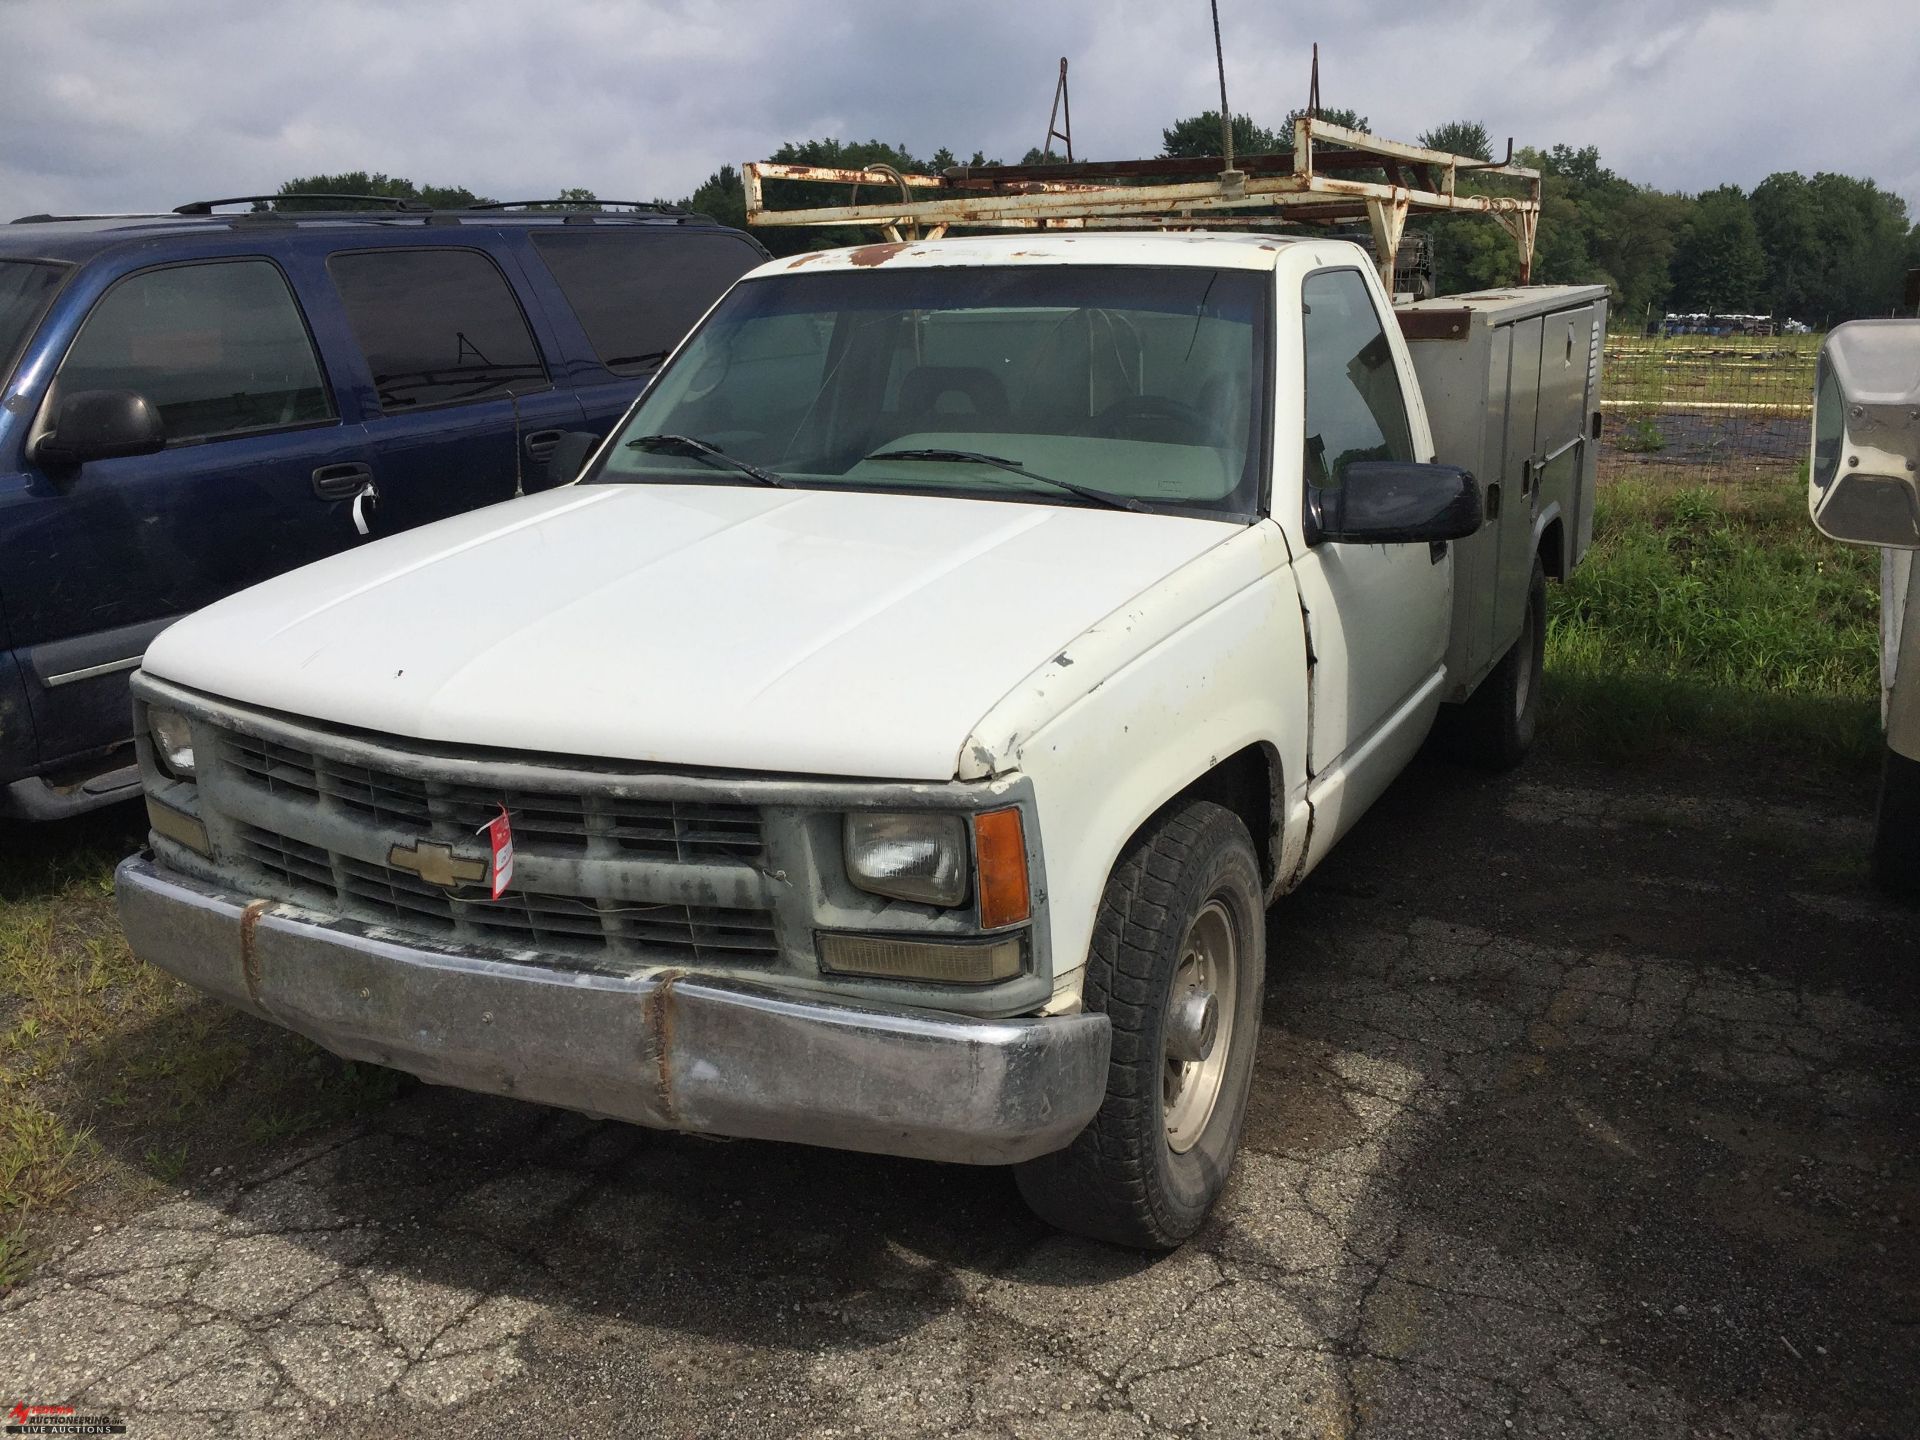 1995 CHEVROLET REGULAR CAB TRUCK WITH SERVICE BODY, STAHL 8' UTILITY BOX, GAS ENGINE, AUTOMATIC